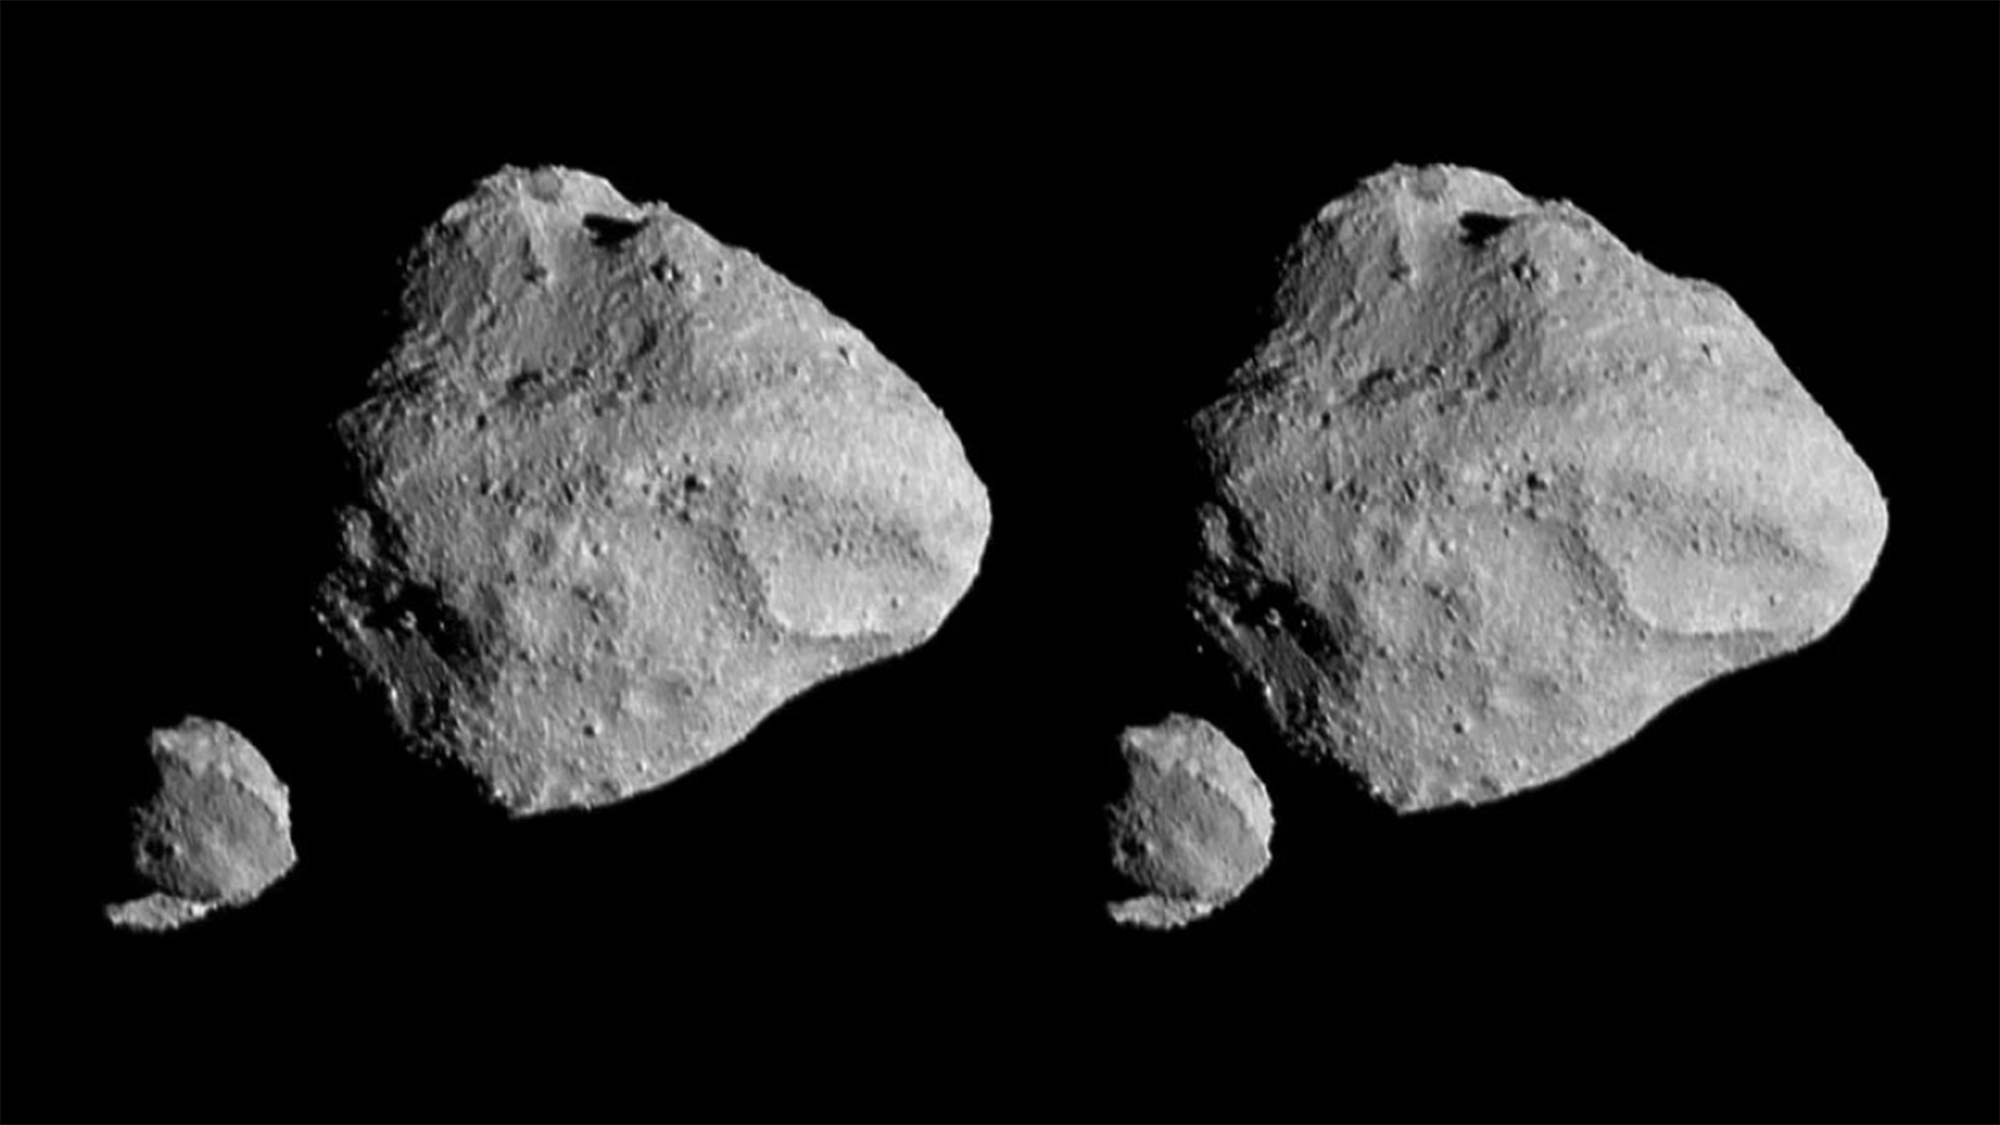 a small asteroid orbits around a larger one